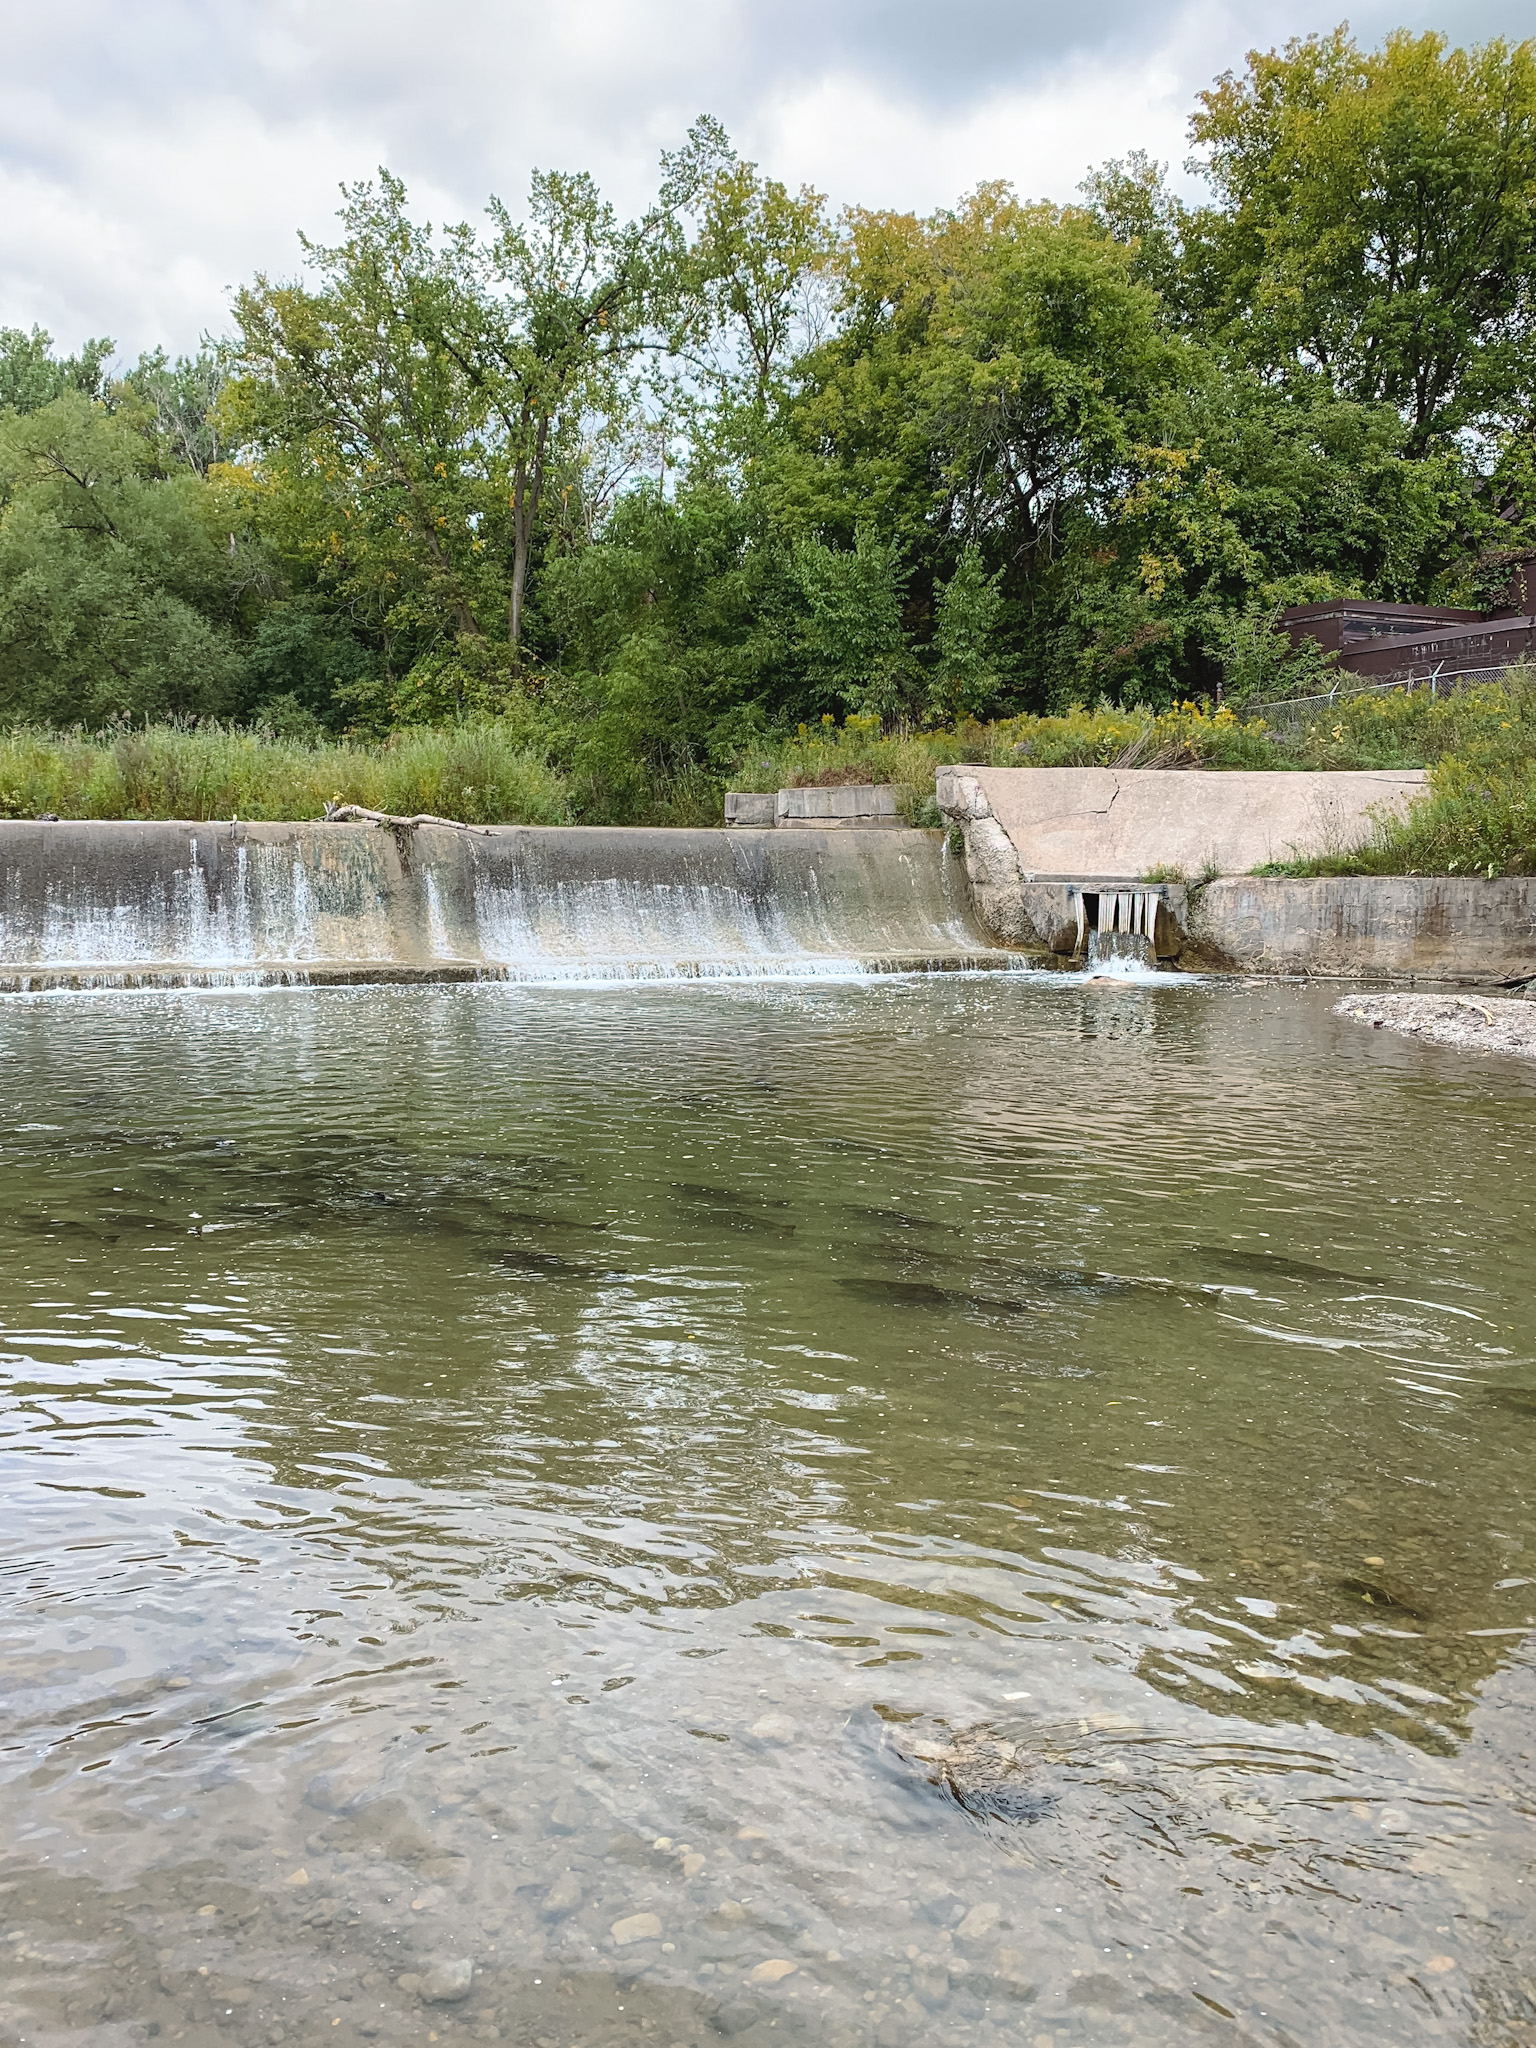 Salmon migration at Bowmanville Creek in Bowmanville, Ontario